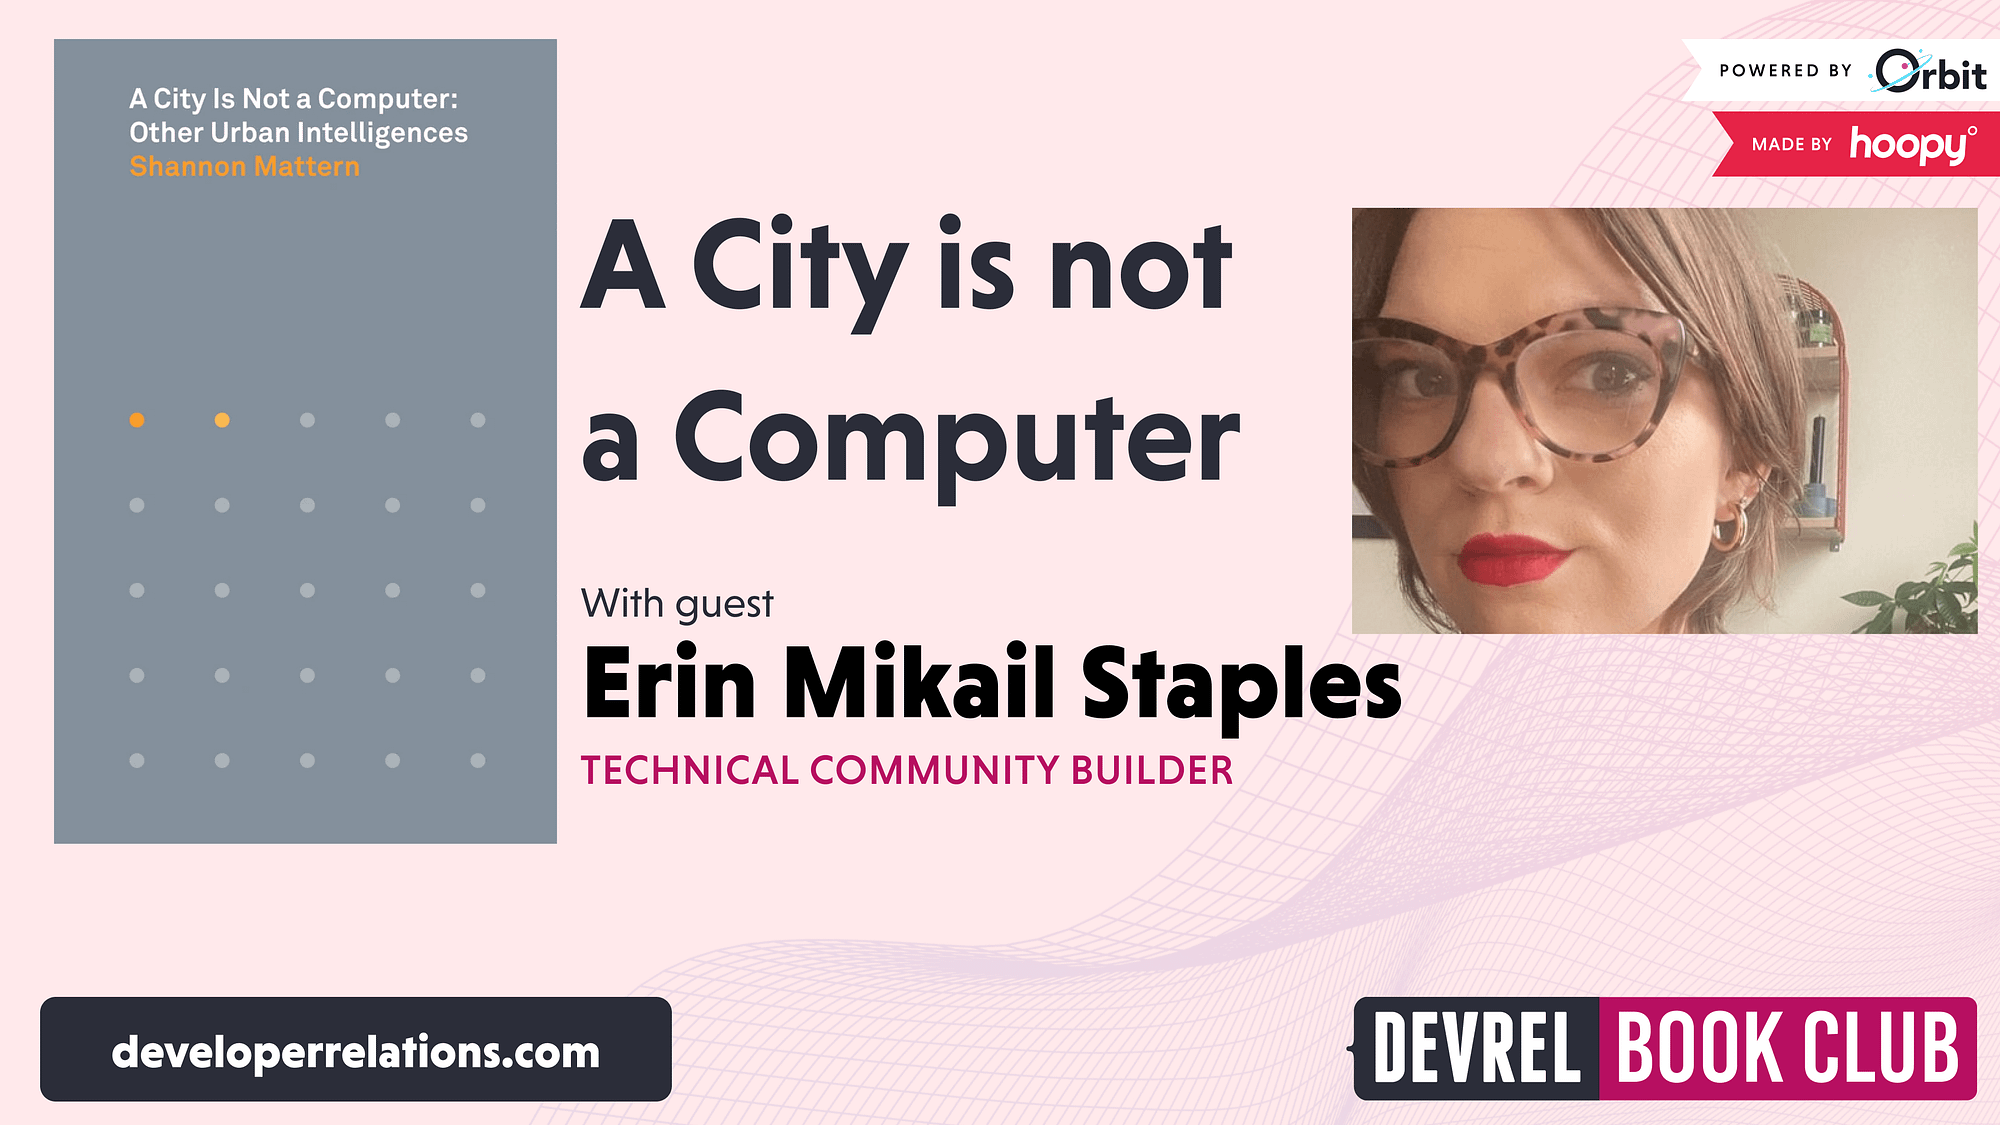 A City is not a Computer with Erin Mikail Staples